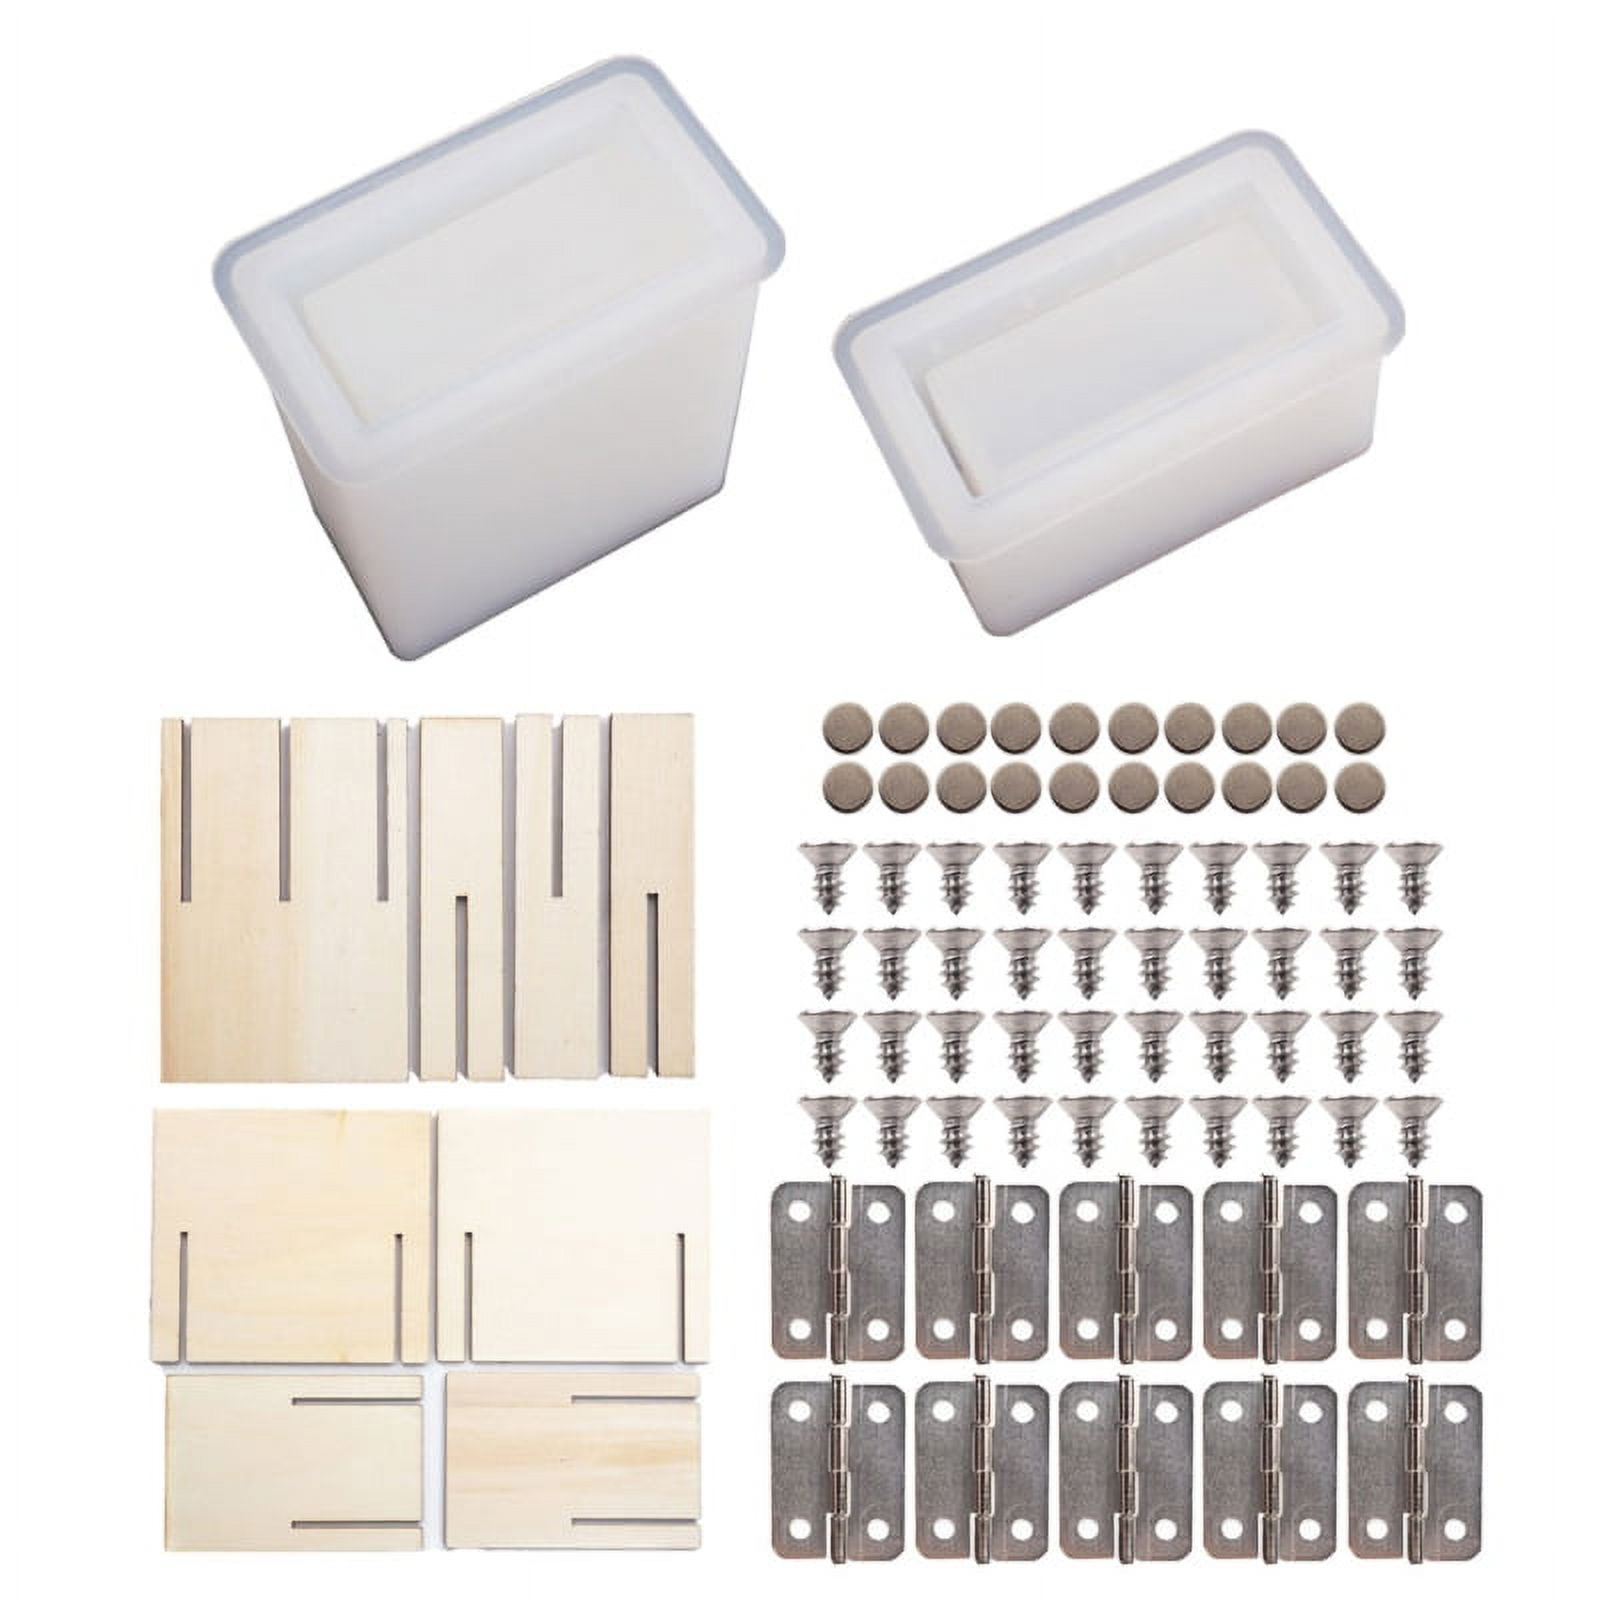  VILLCASE 4 Sets Storage Box Mold Resin Molds Silicone